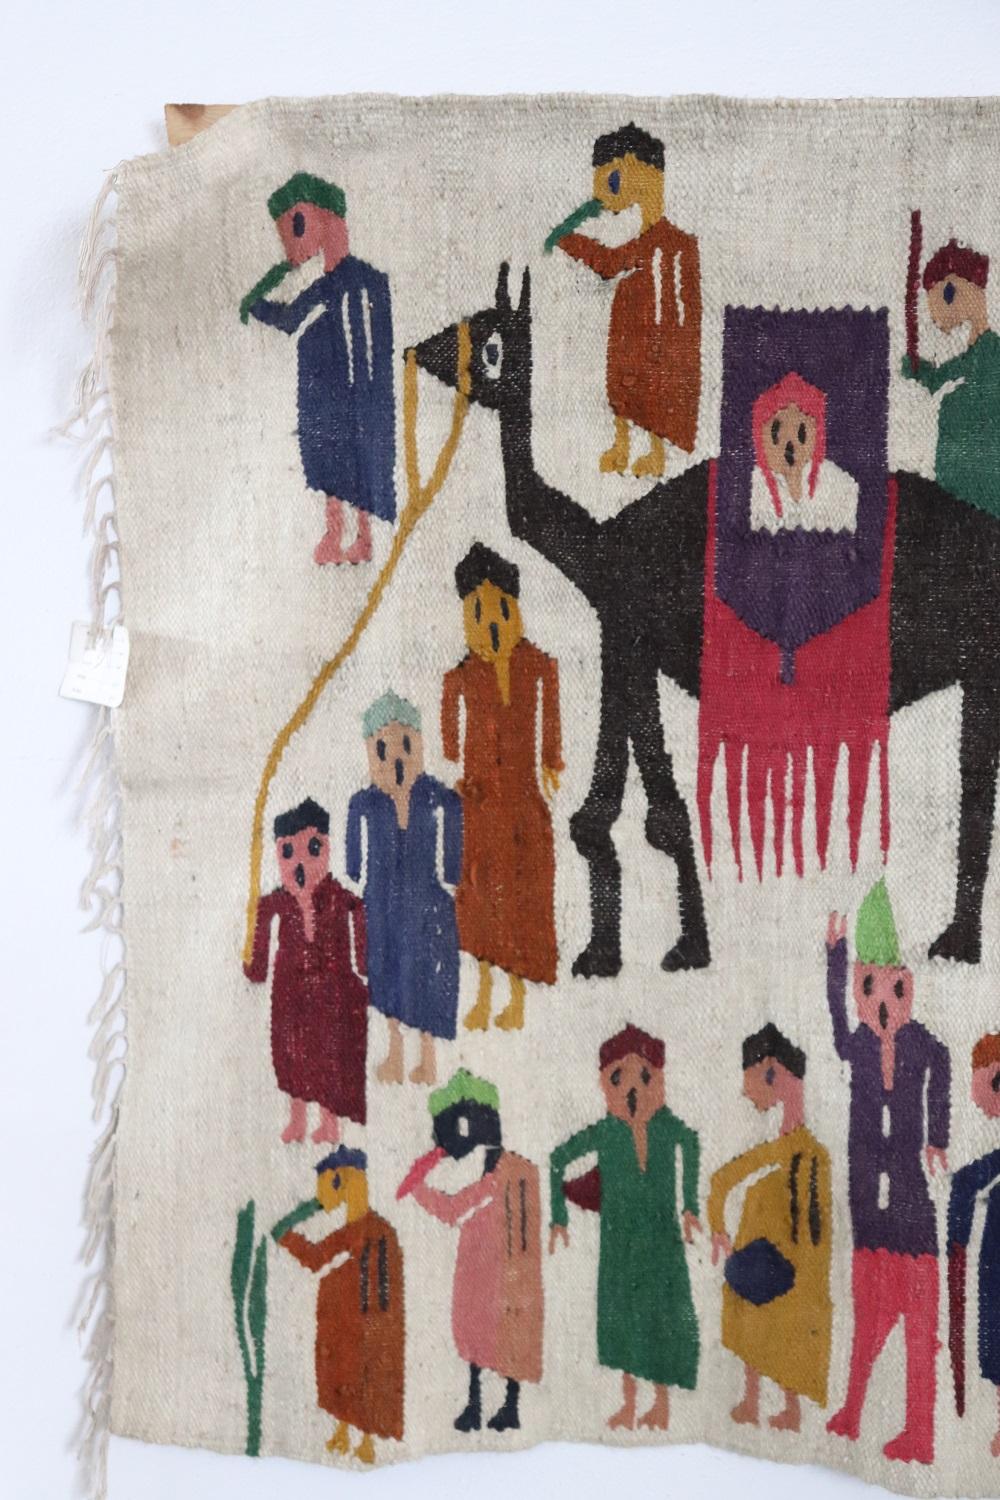 Beautiful 20th century ( 1930s circa)  Israeli wall tapestry handmade in wool. This tapestry is characterized by a beautiful judaic purim scene. We see the people prepare for the journey and celebrate the heroic deeds of Esther and Mordecai, who set